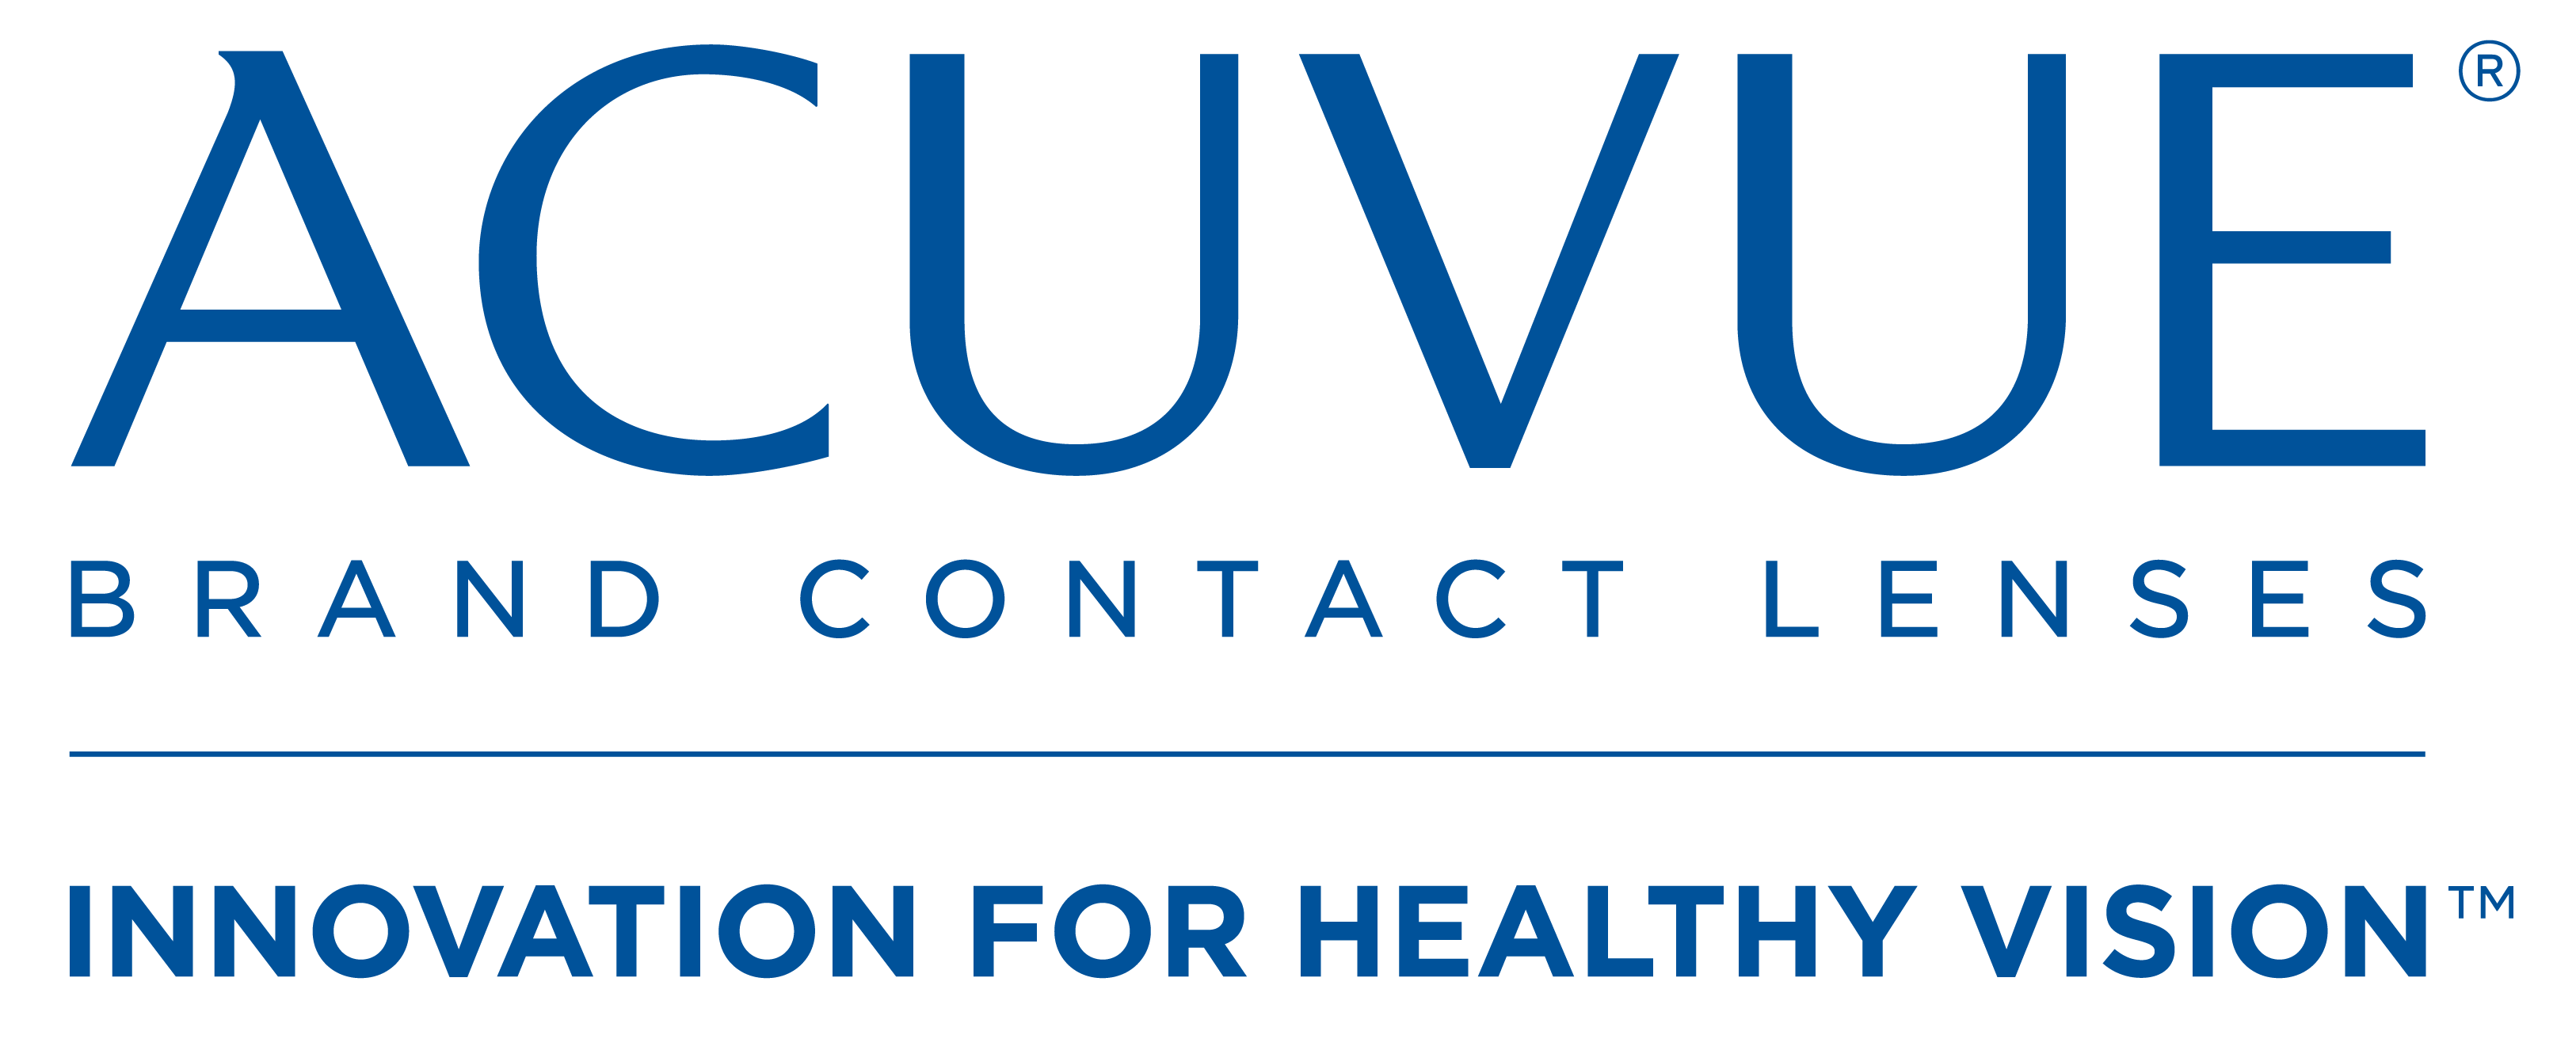 Acuvue Logo - Acuvue logo png PNG Image